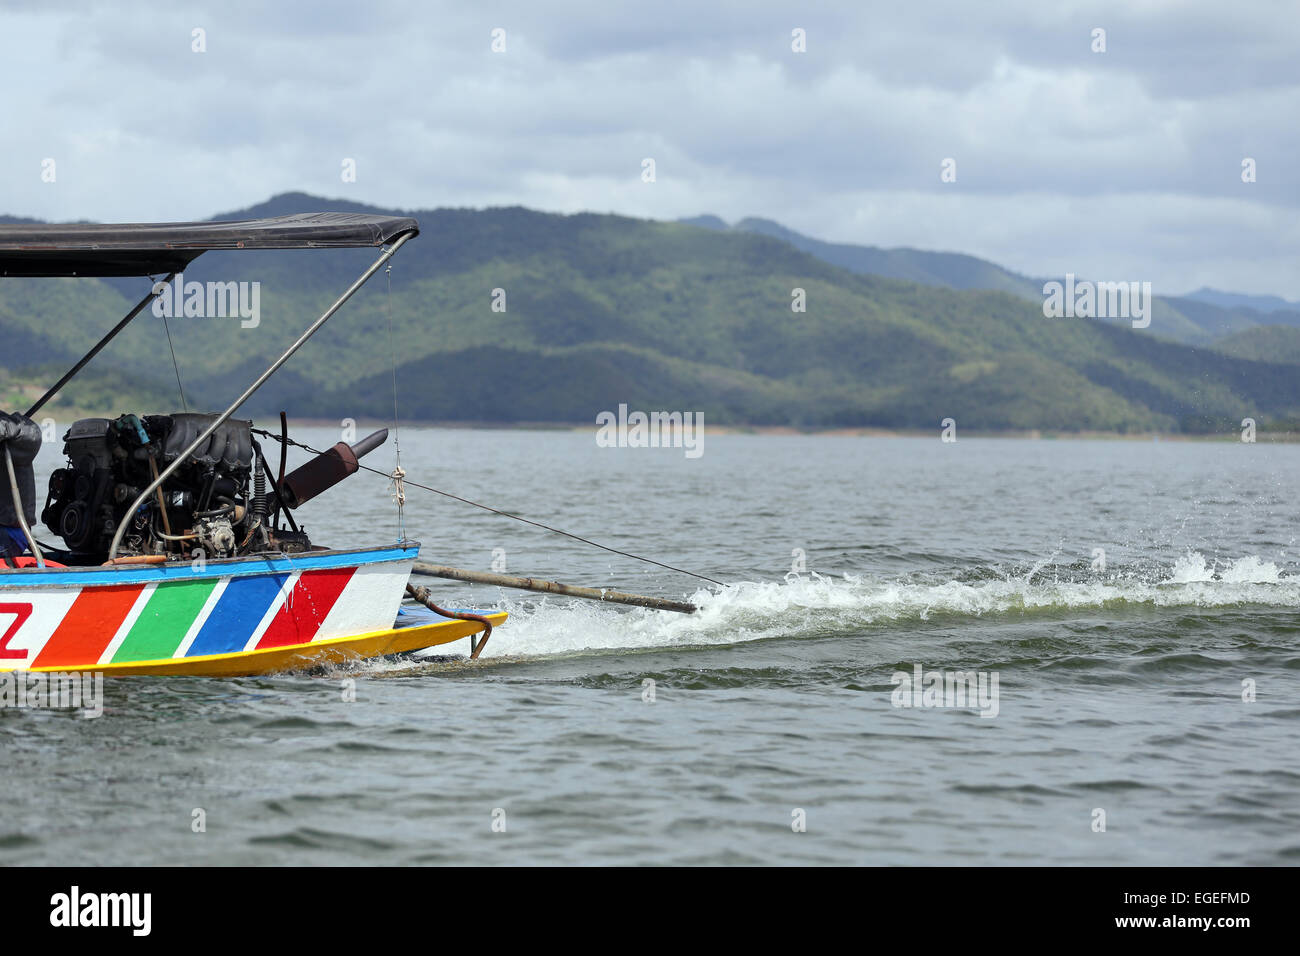 Outboard motor running on the local boat. Stock Photo